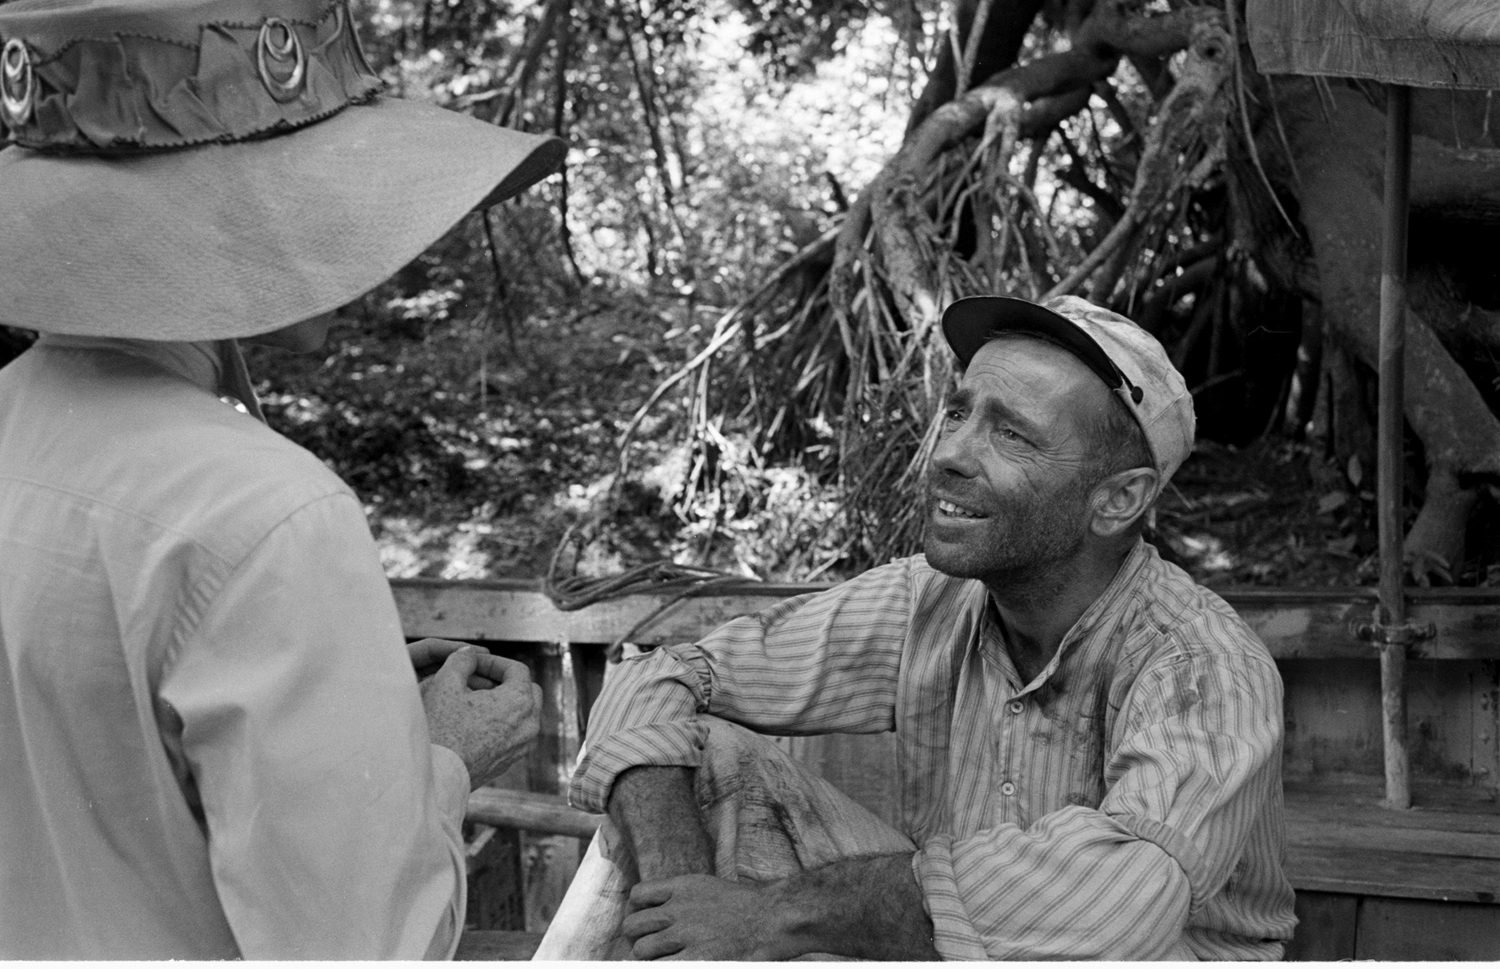 Humphrey Bogart and Katharine Hepburn on location in Africa for the filming of "The African Queen," 1951.